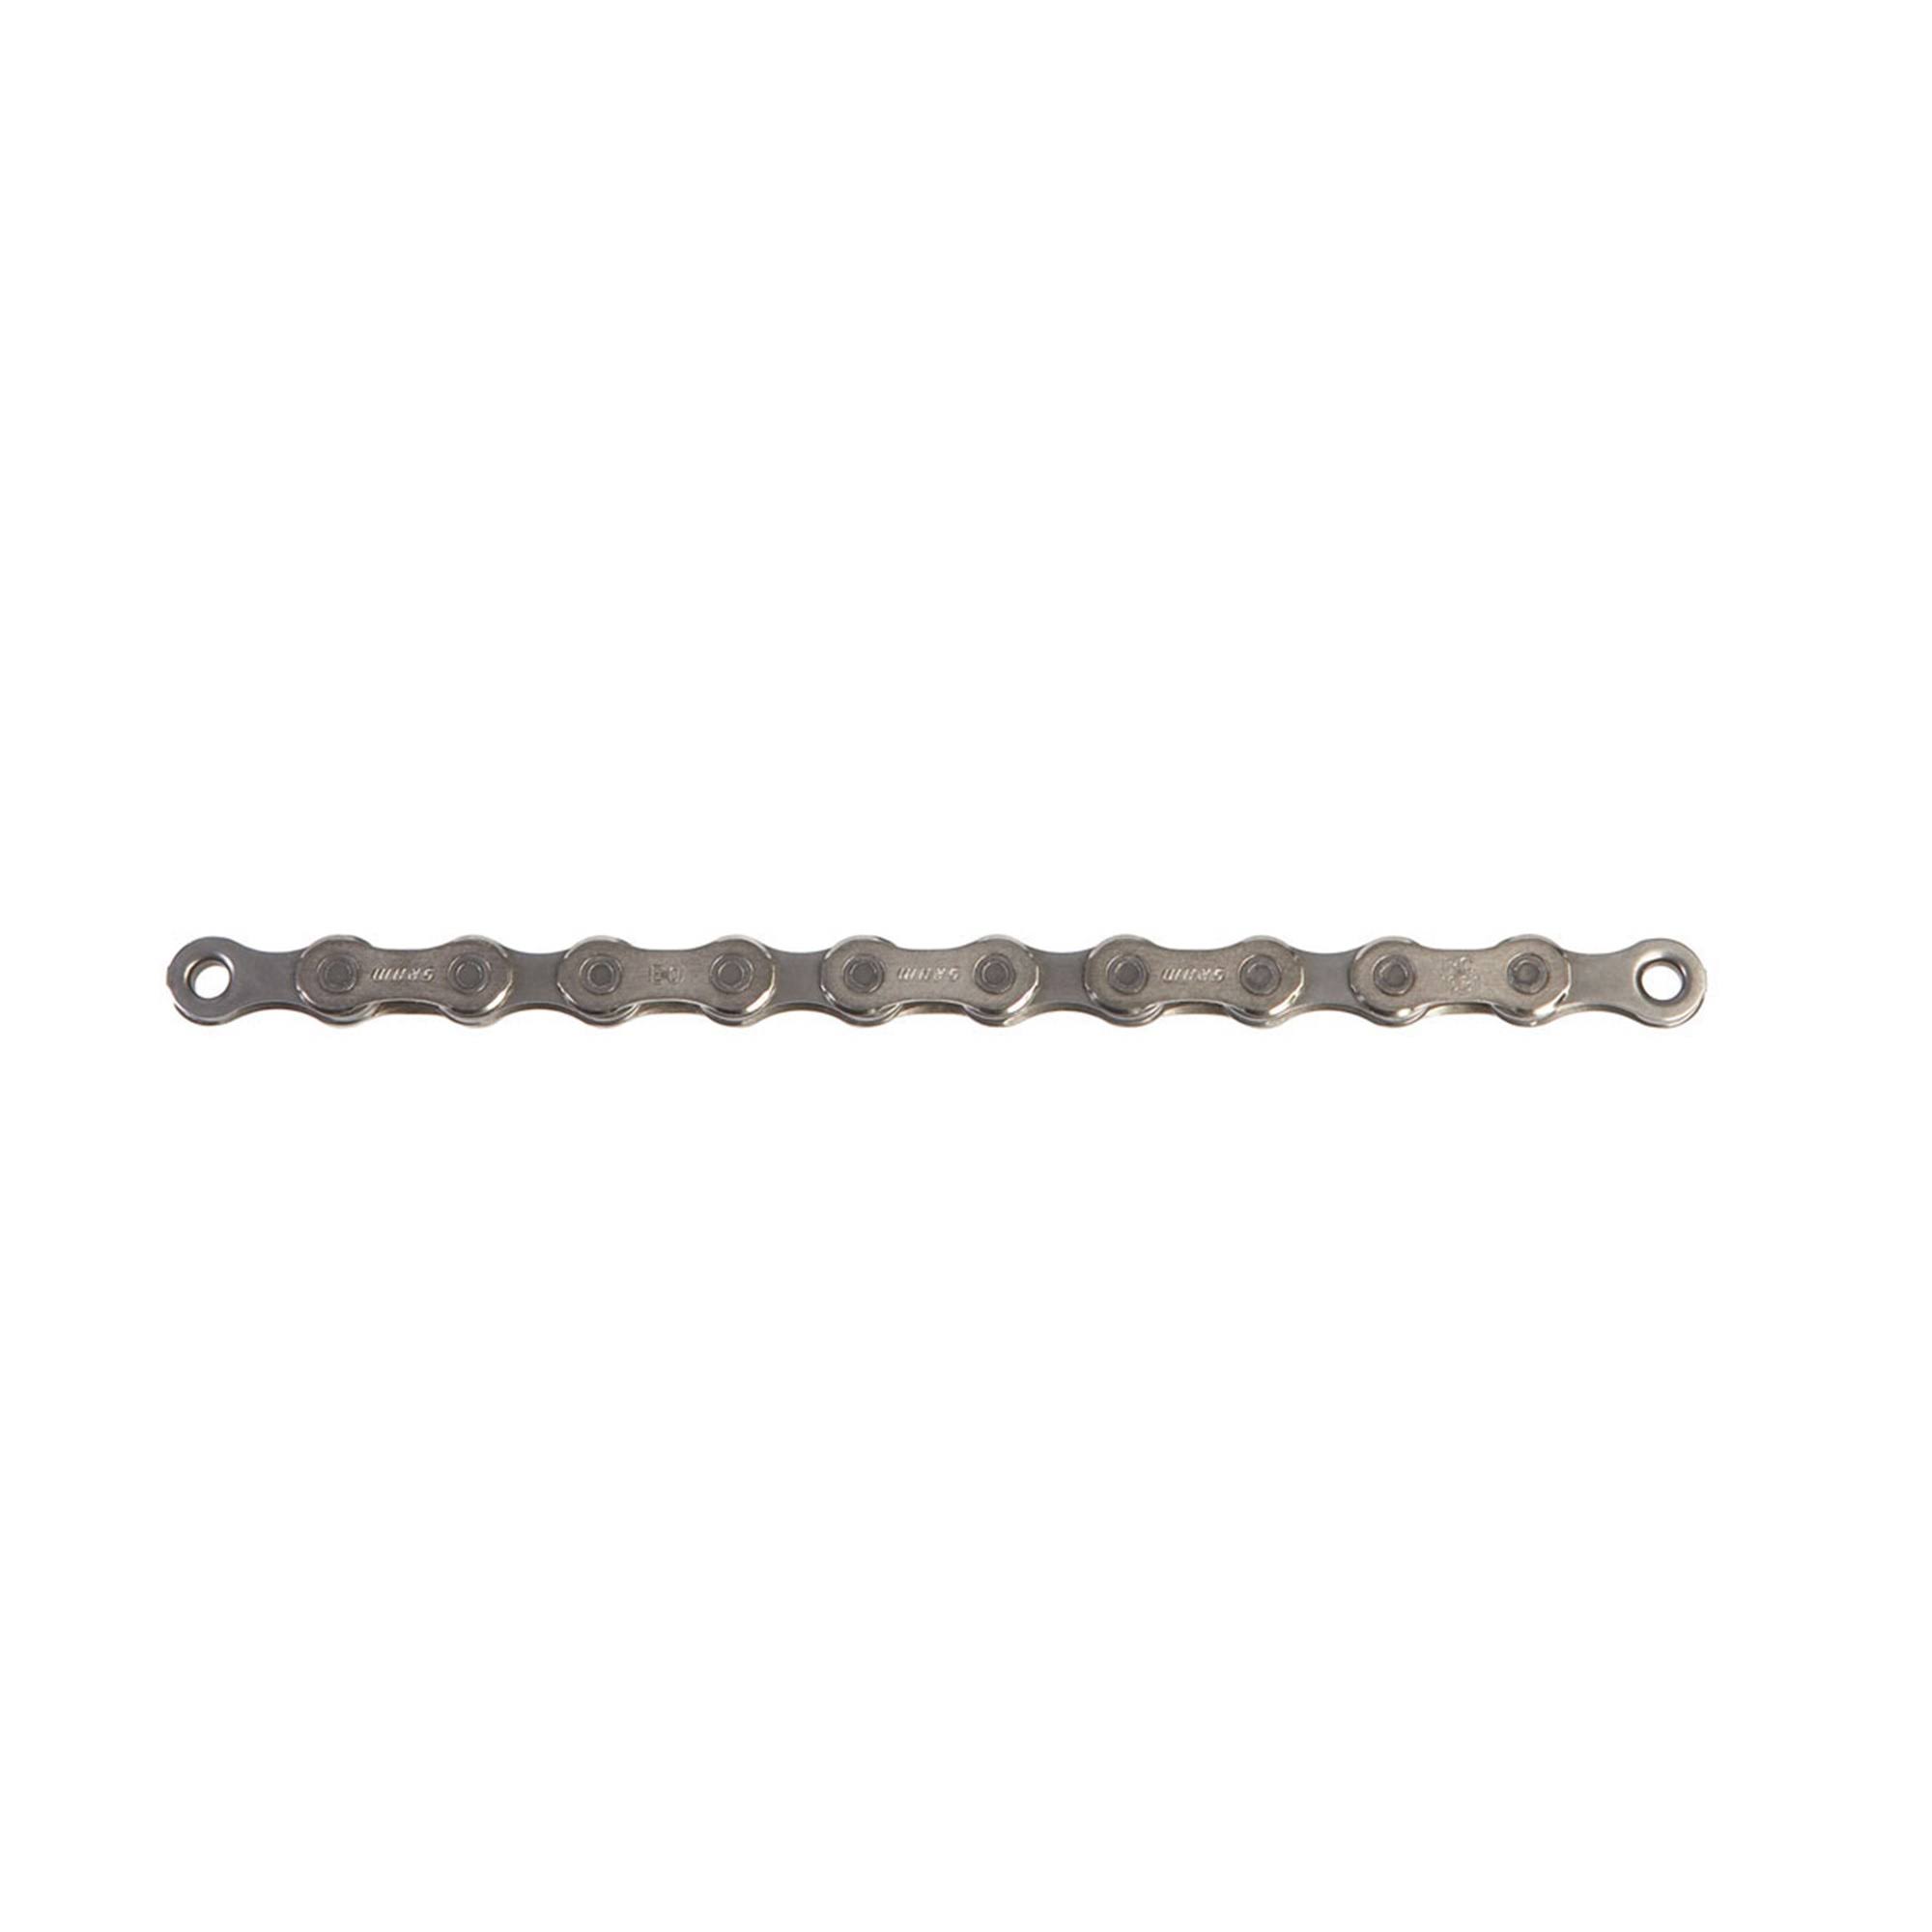 SRAM PC1031 10-Speed Bicycle Chain